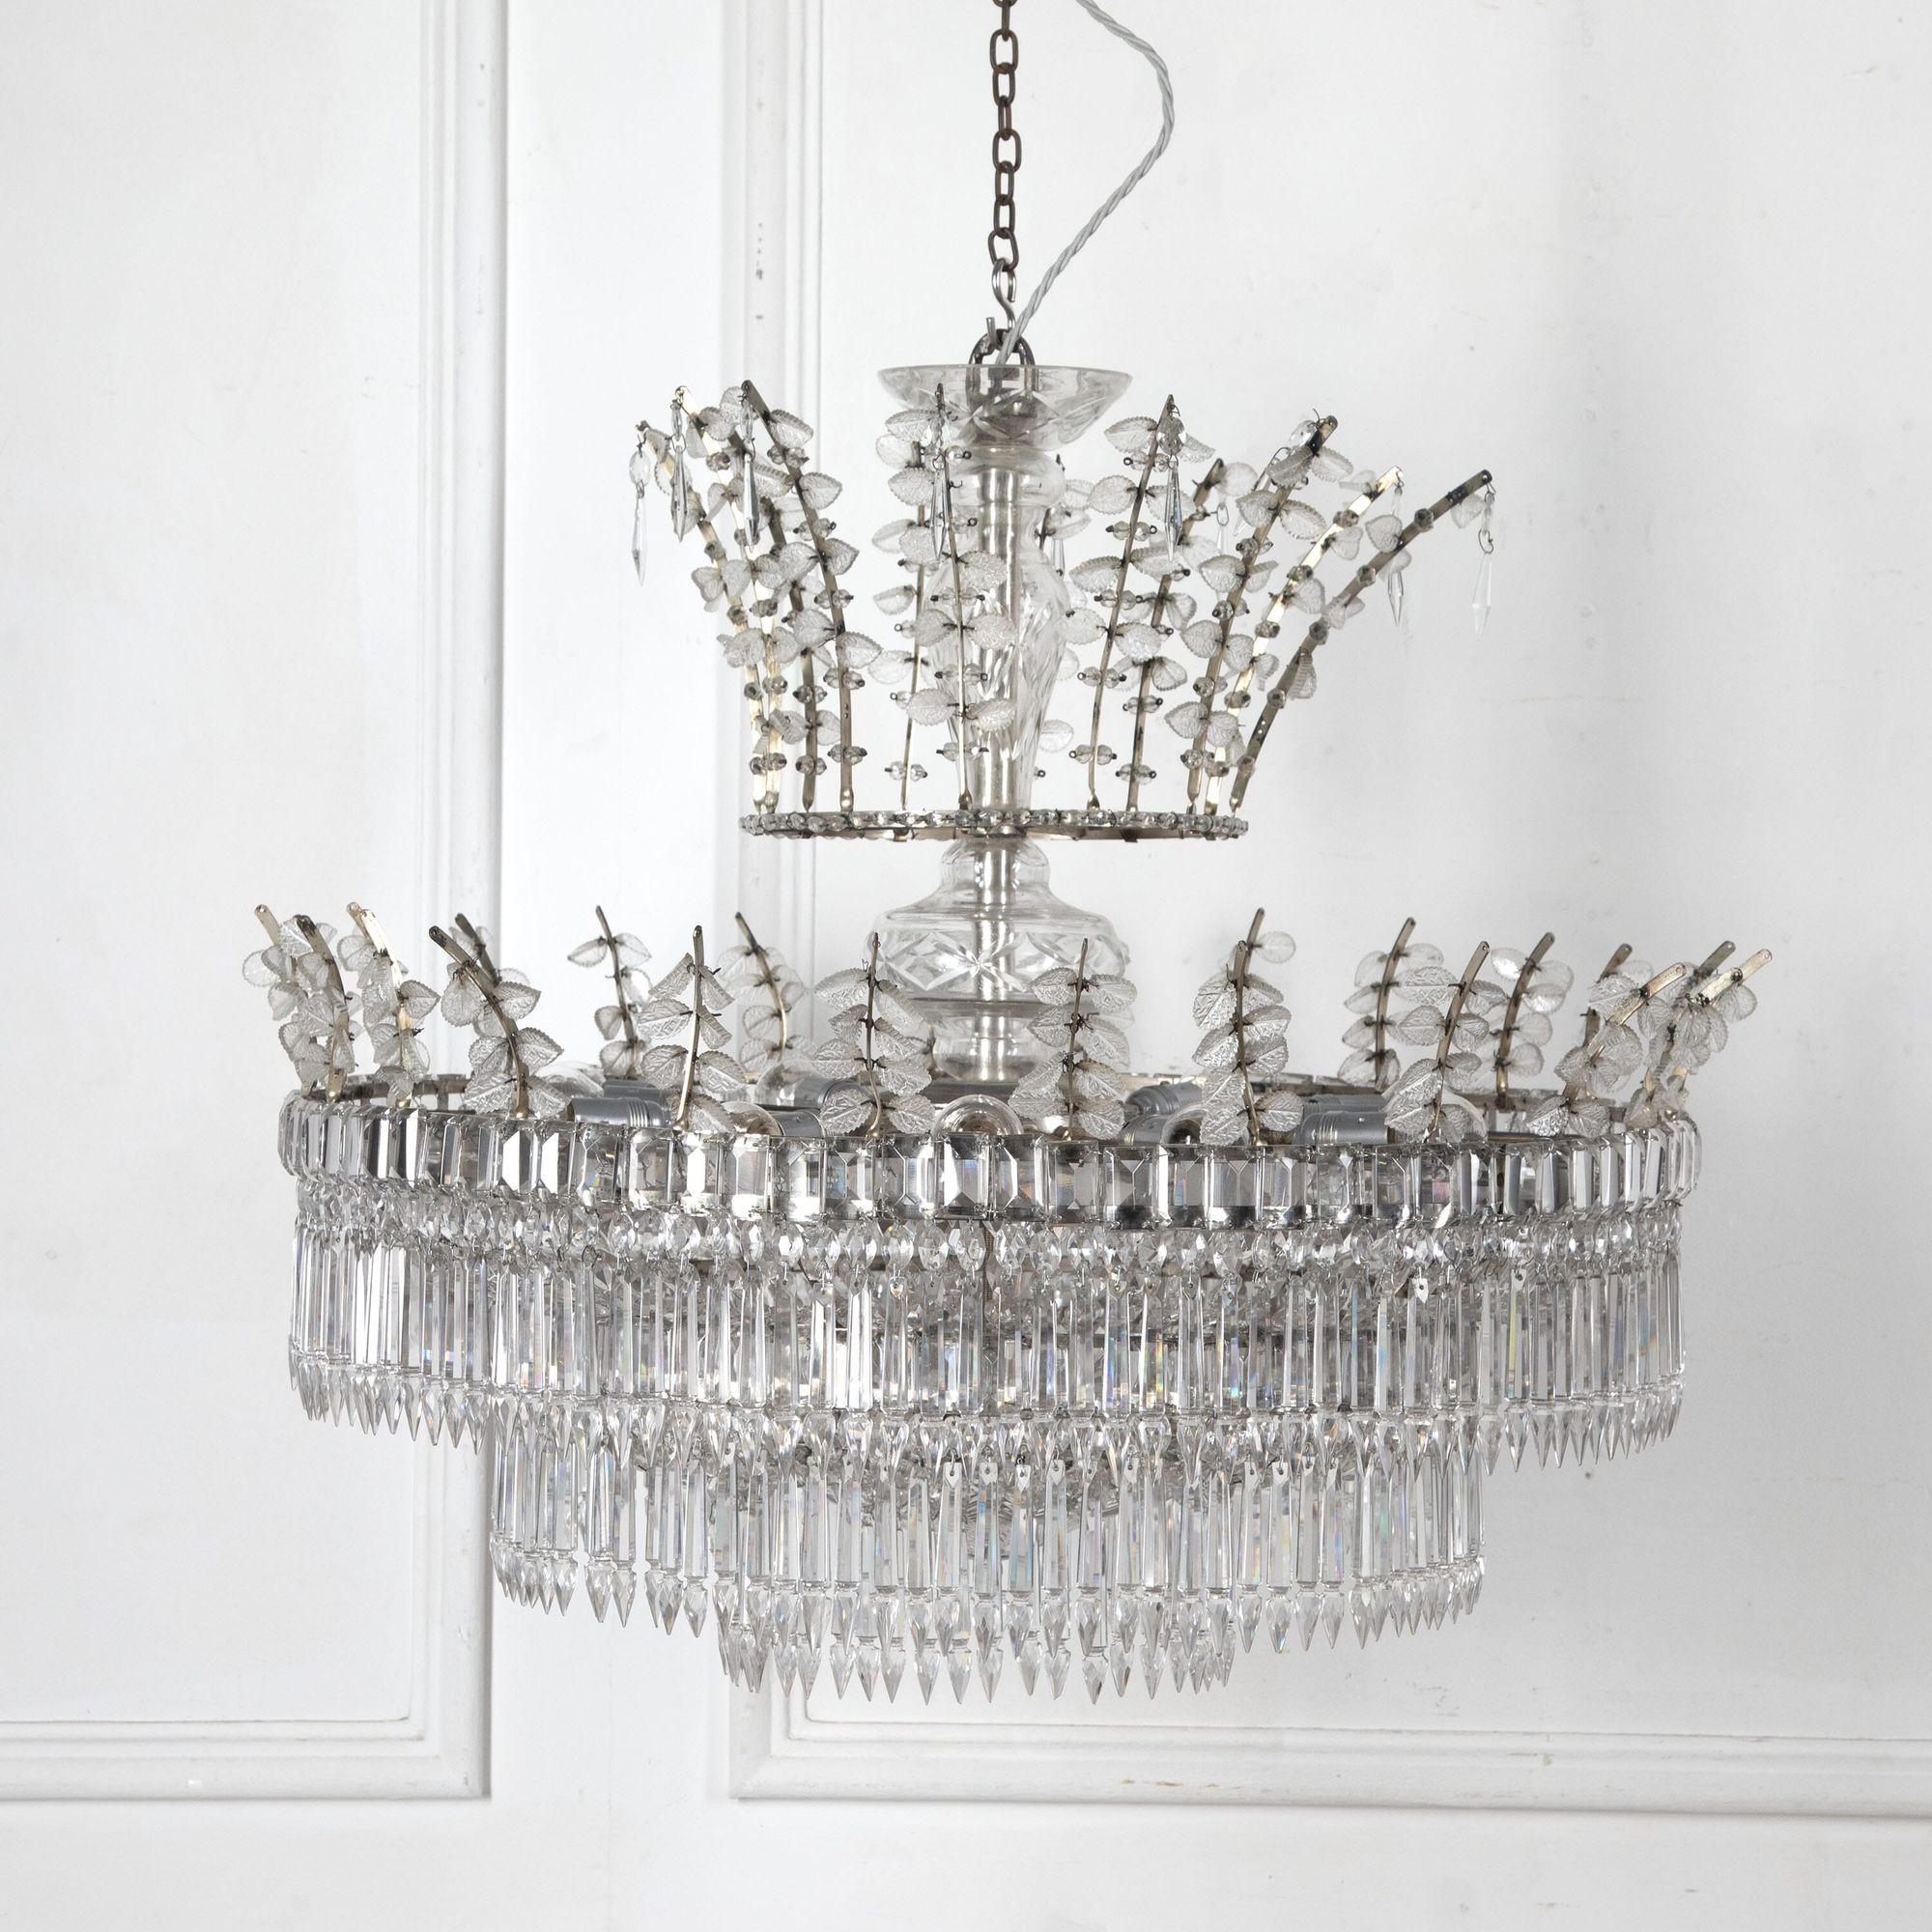 Stunning 20th century Spanish chandelier dating from the 1970s.
In good condition for its age with very few signs of wear. 

This chandelier has been rewired and pat tested to UK standards.